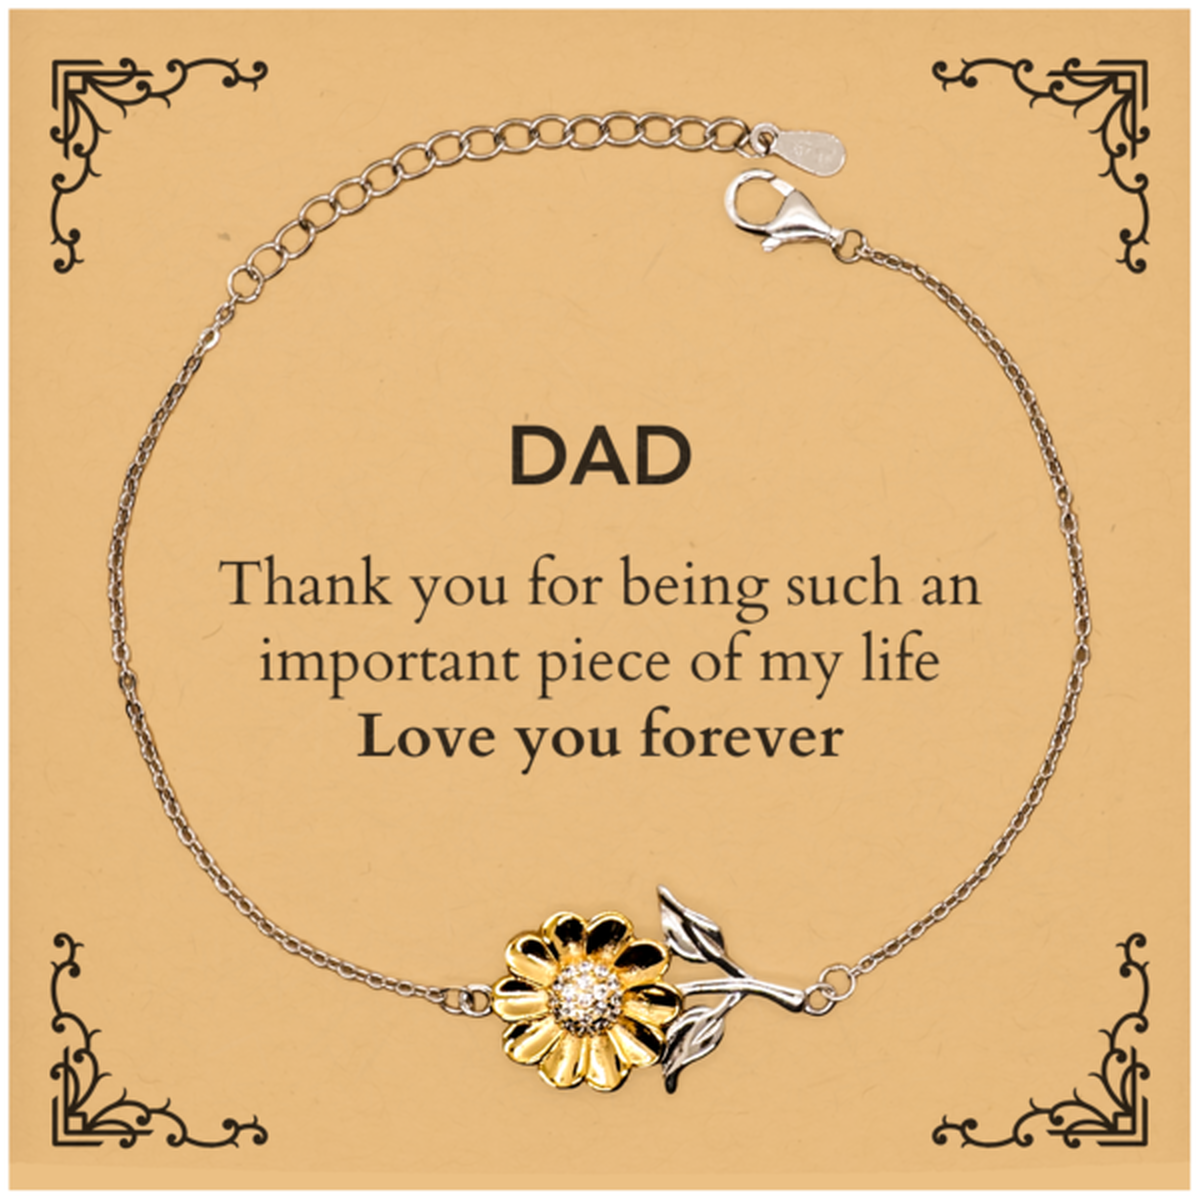 Appropriate Dad Sunflower Bracelet Epic Birthday Gifts for Dad Thank you for being such an important piece of my life Dad Christmas Mothers Fathers Day